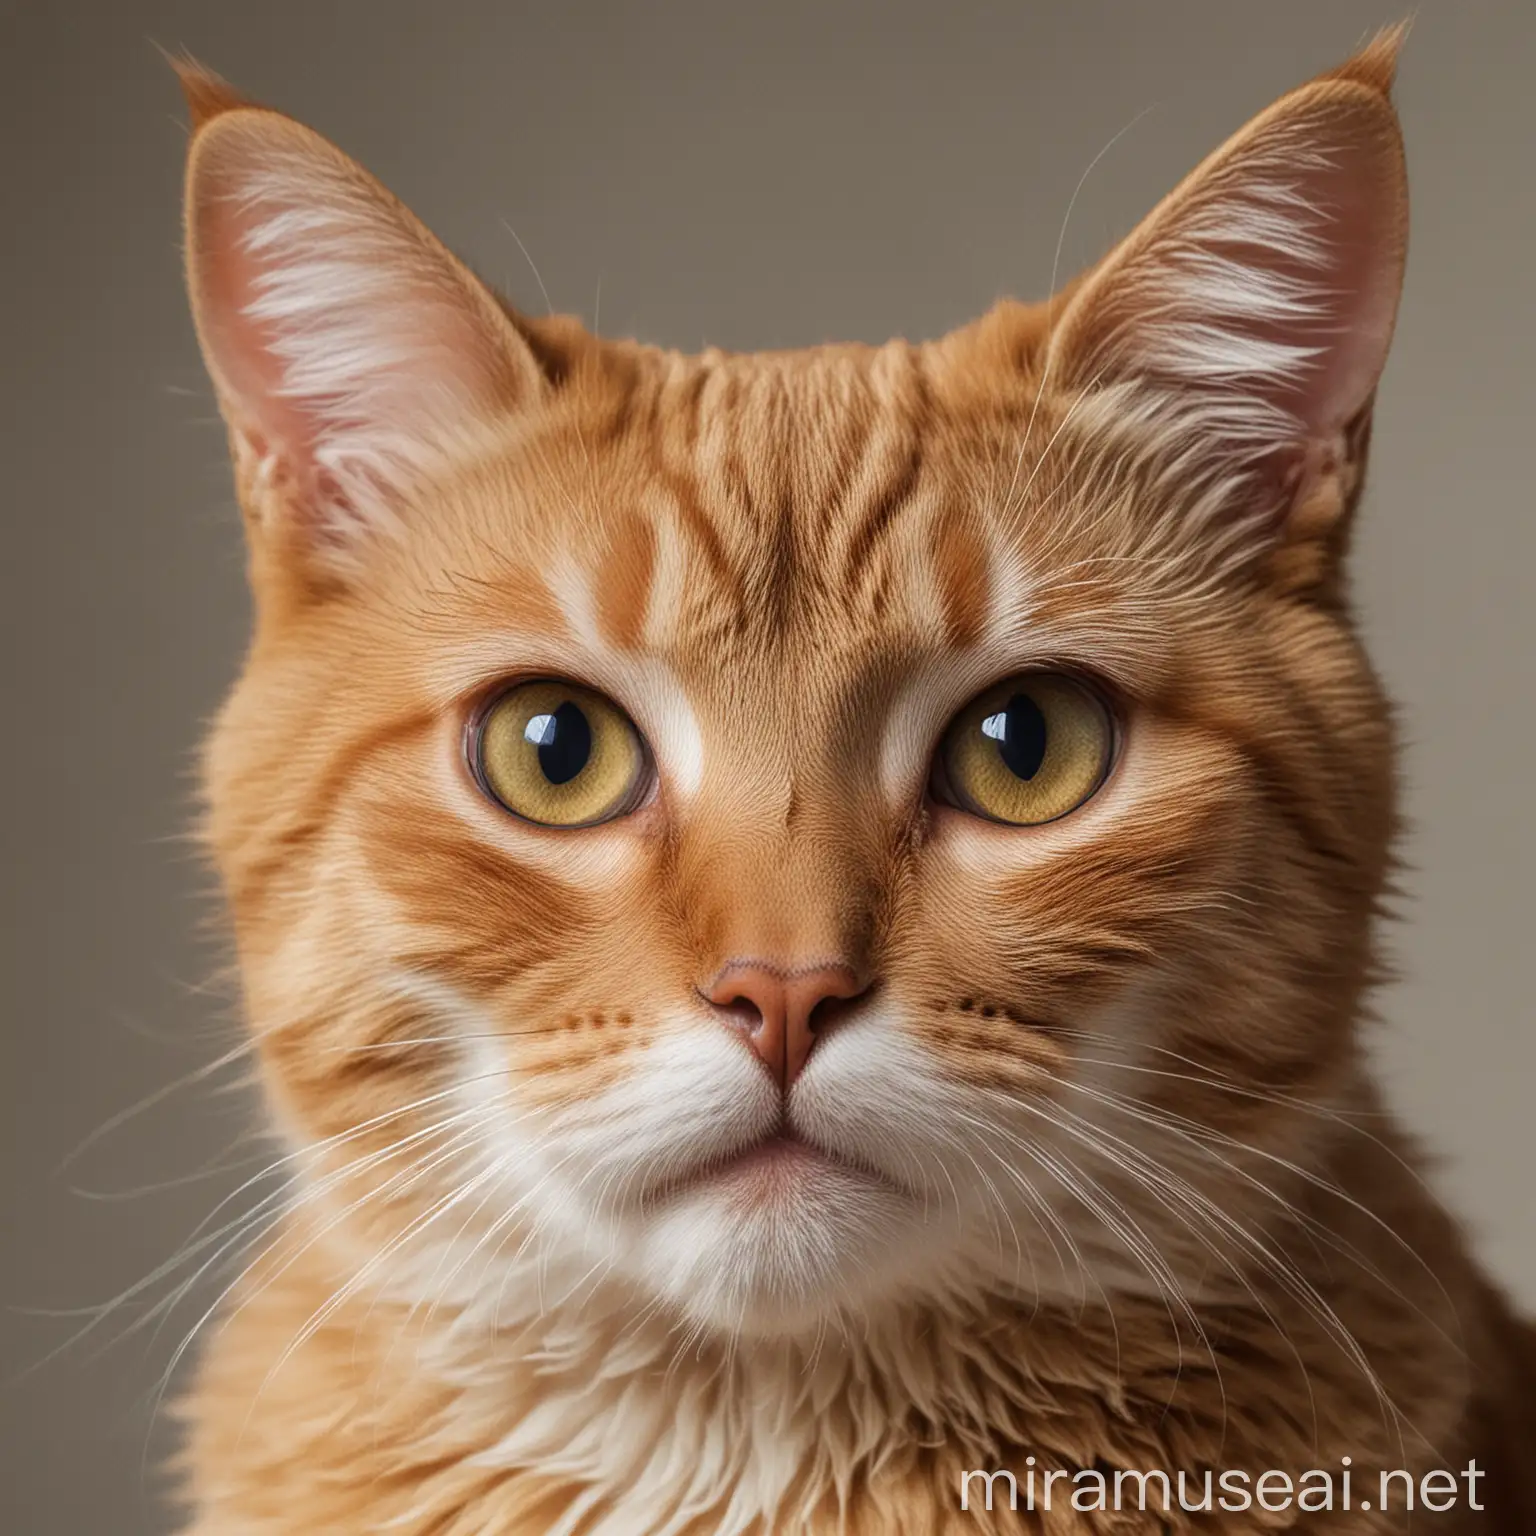 ake captivating solo portraits of your cat focusing on their face, expressions, and personality.

